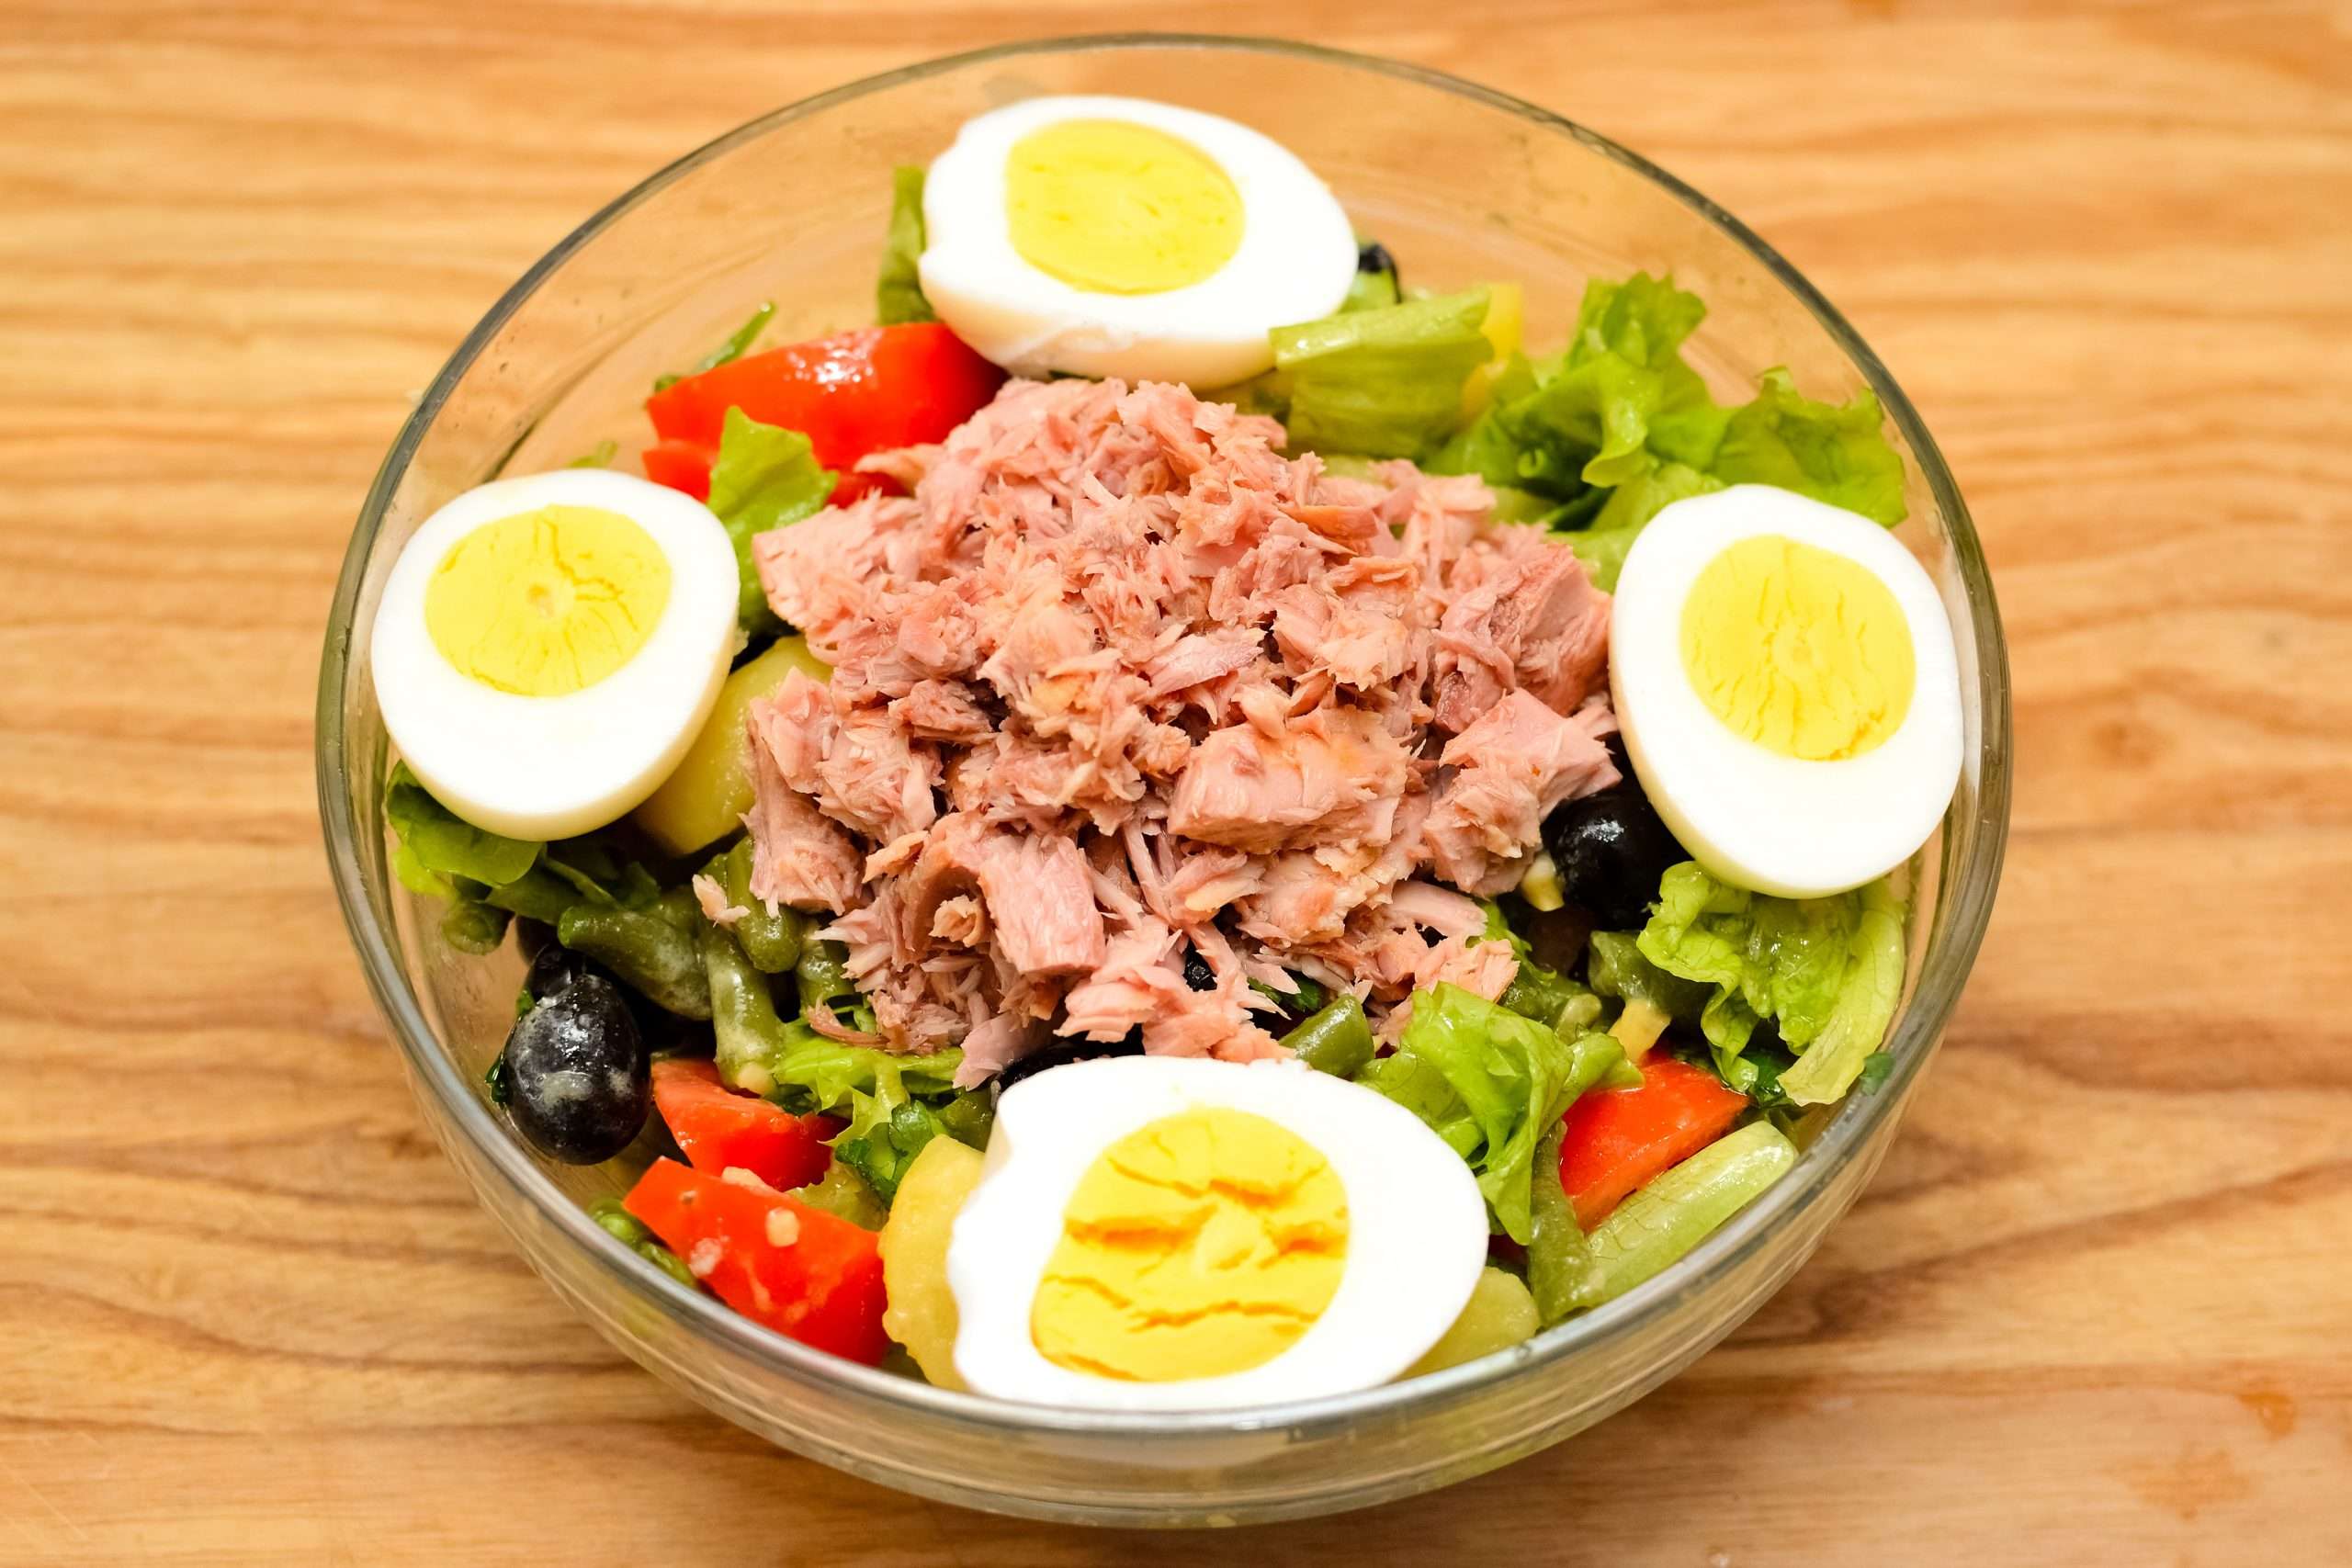 How to Make Salad Nicoise: 5 Steps (with Pictures)